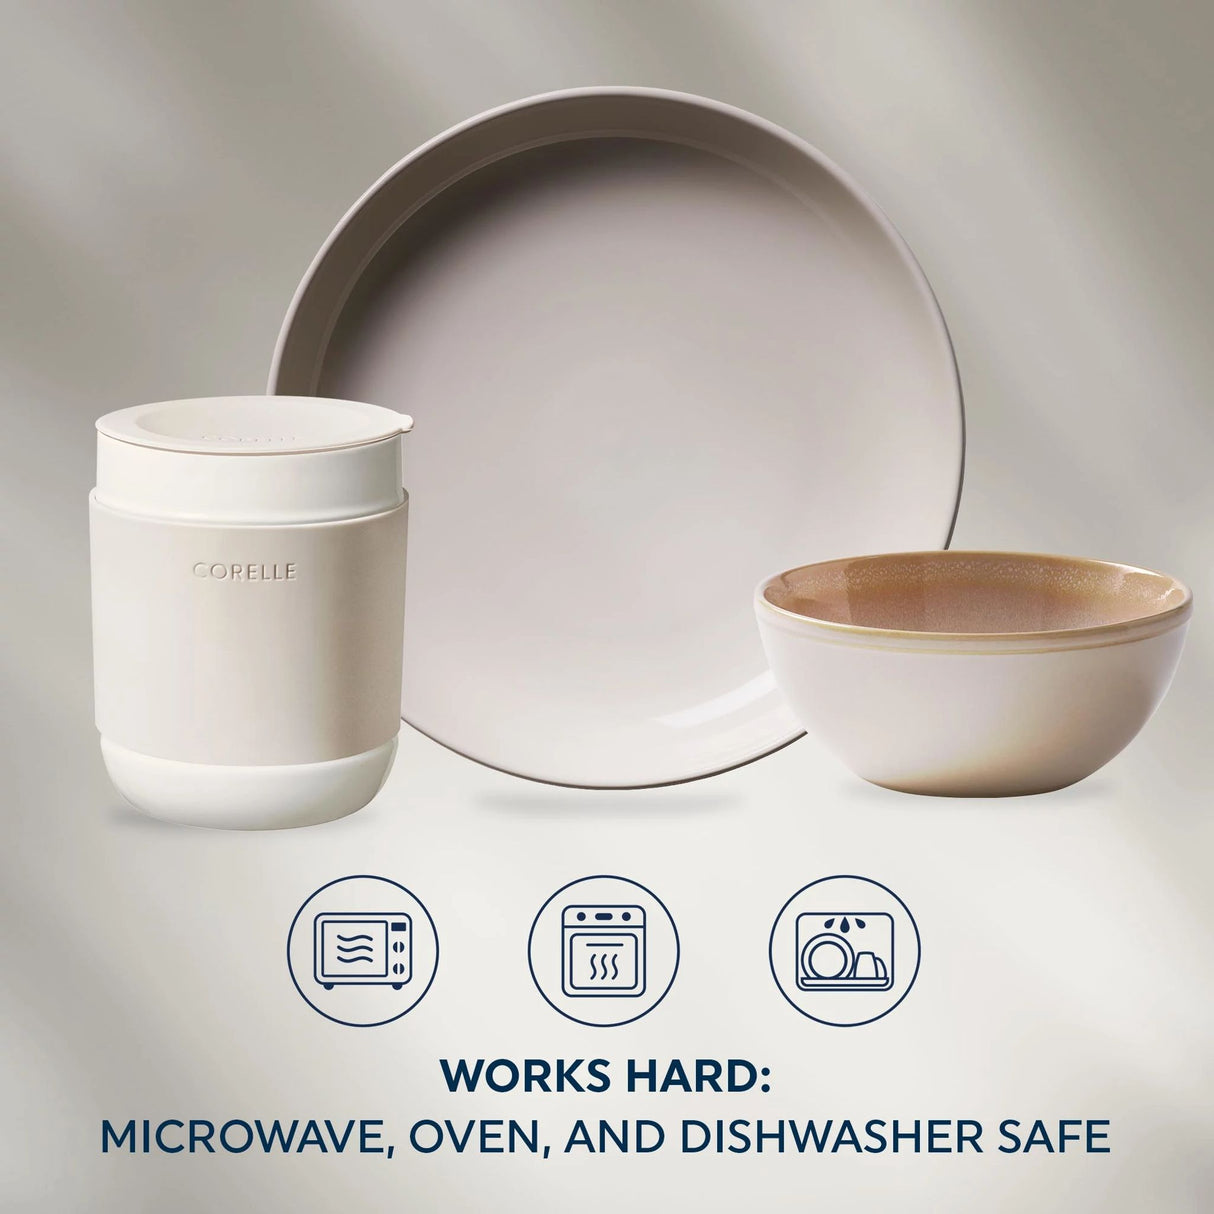  Text that says: Works hard: Microwave, oven and dishwasher safe